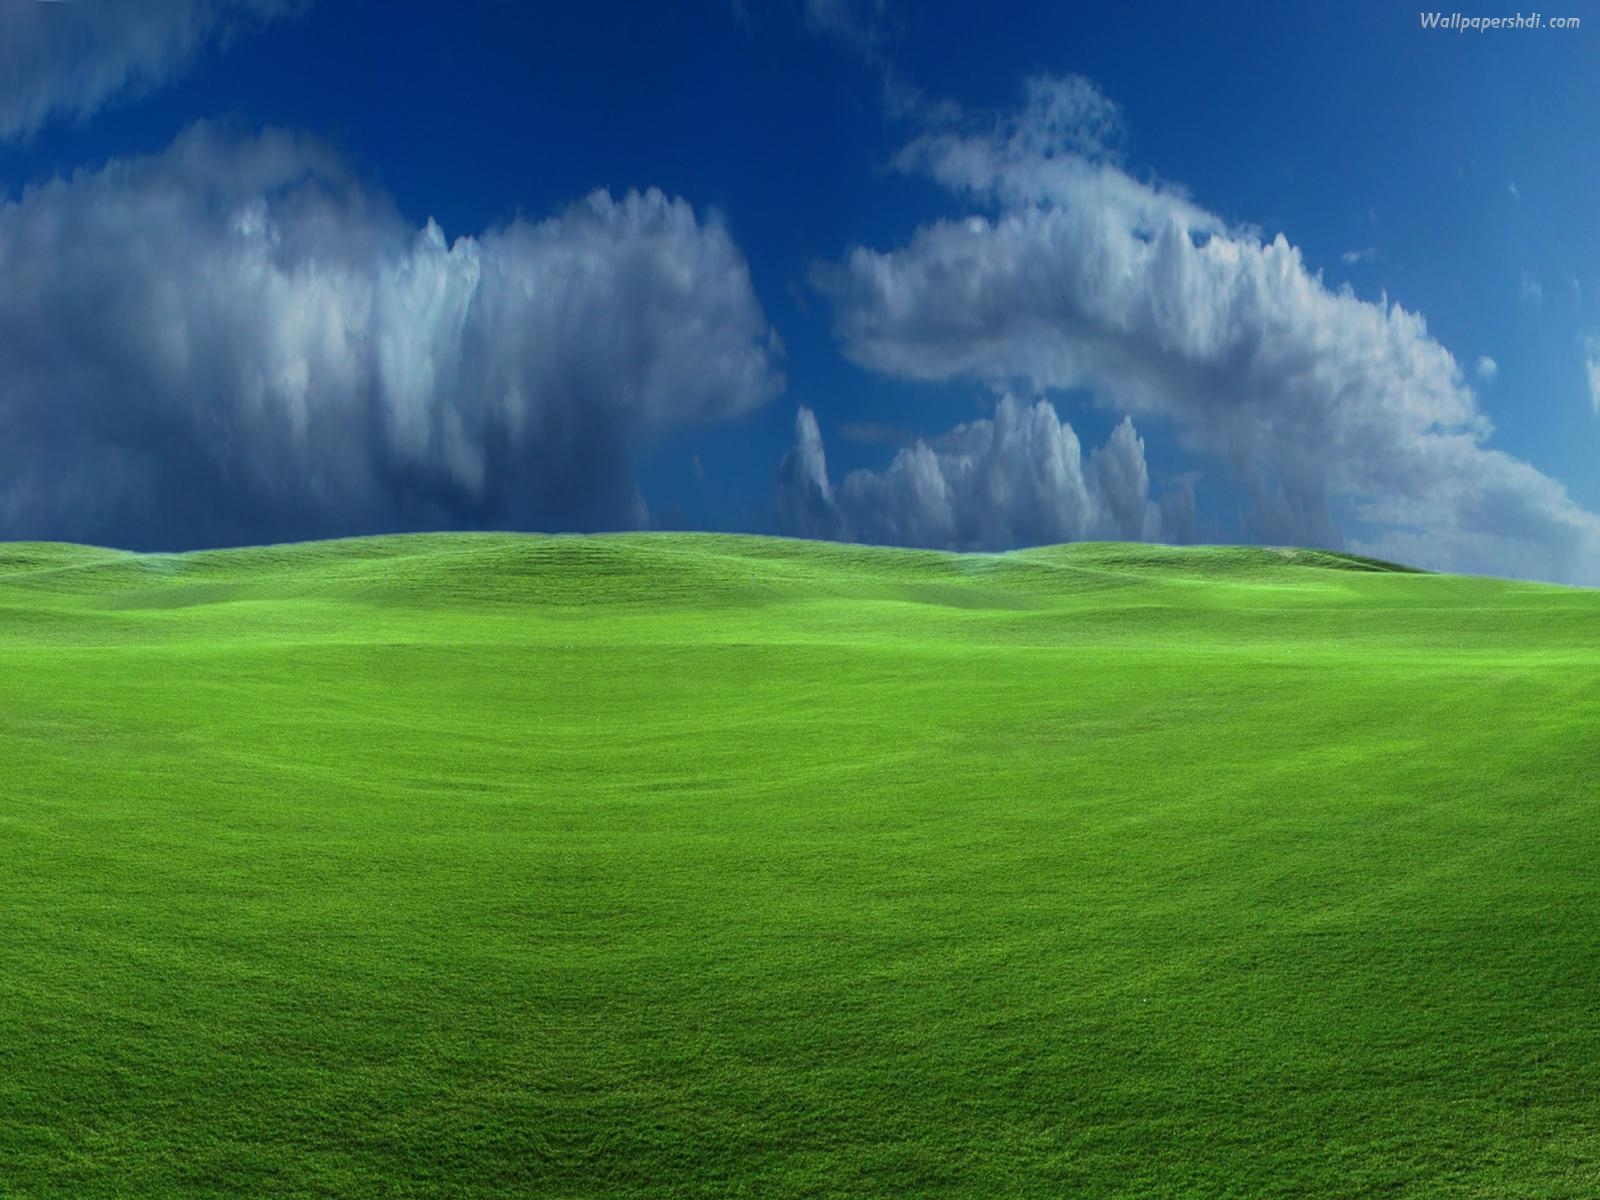 Wallpapers Windows Xp Storm Hd For Free Backgrounds 1600x1200 ...